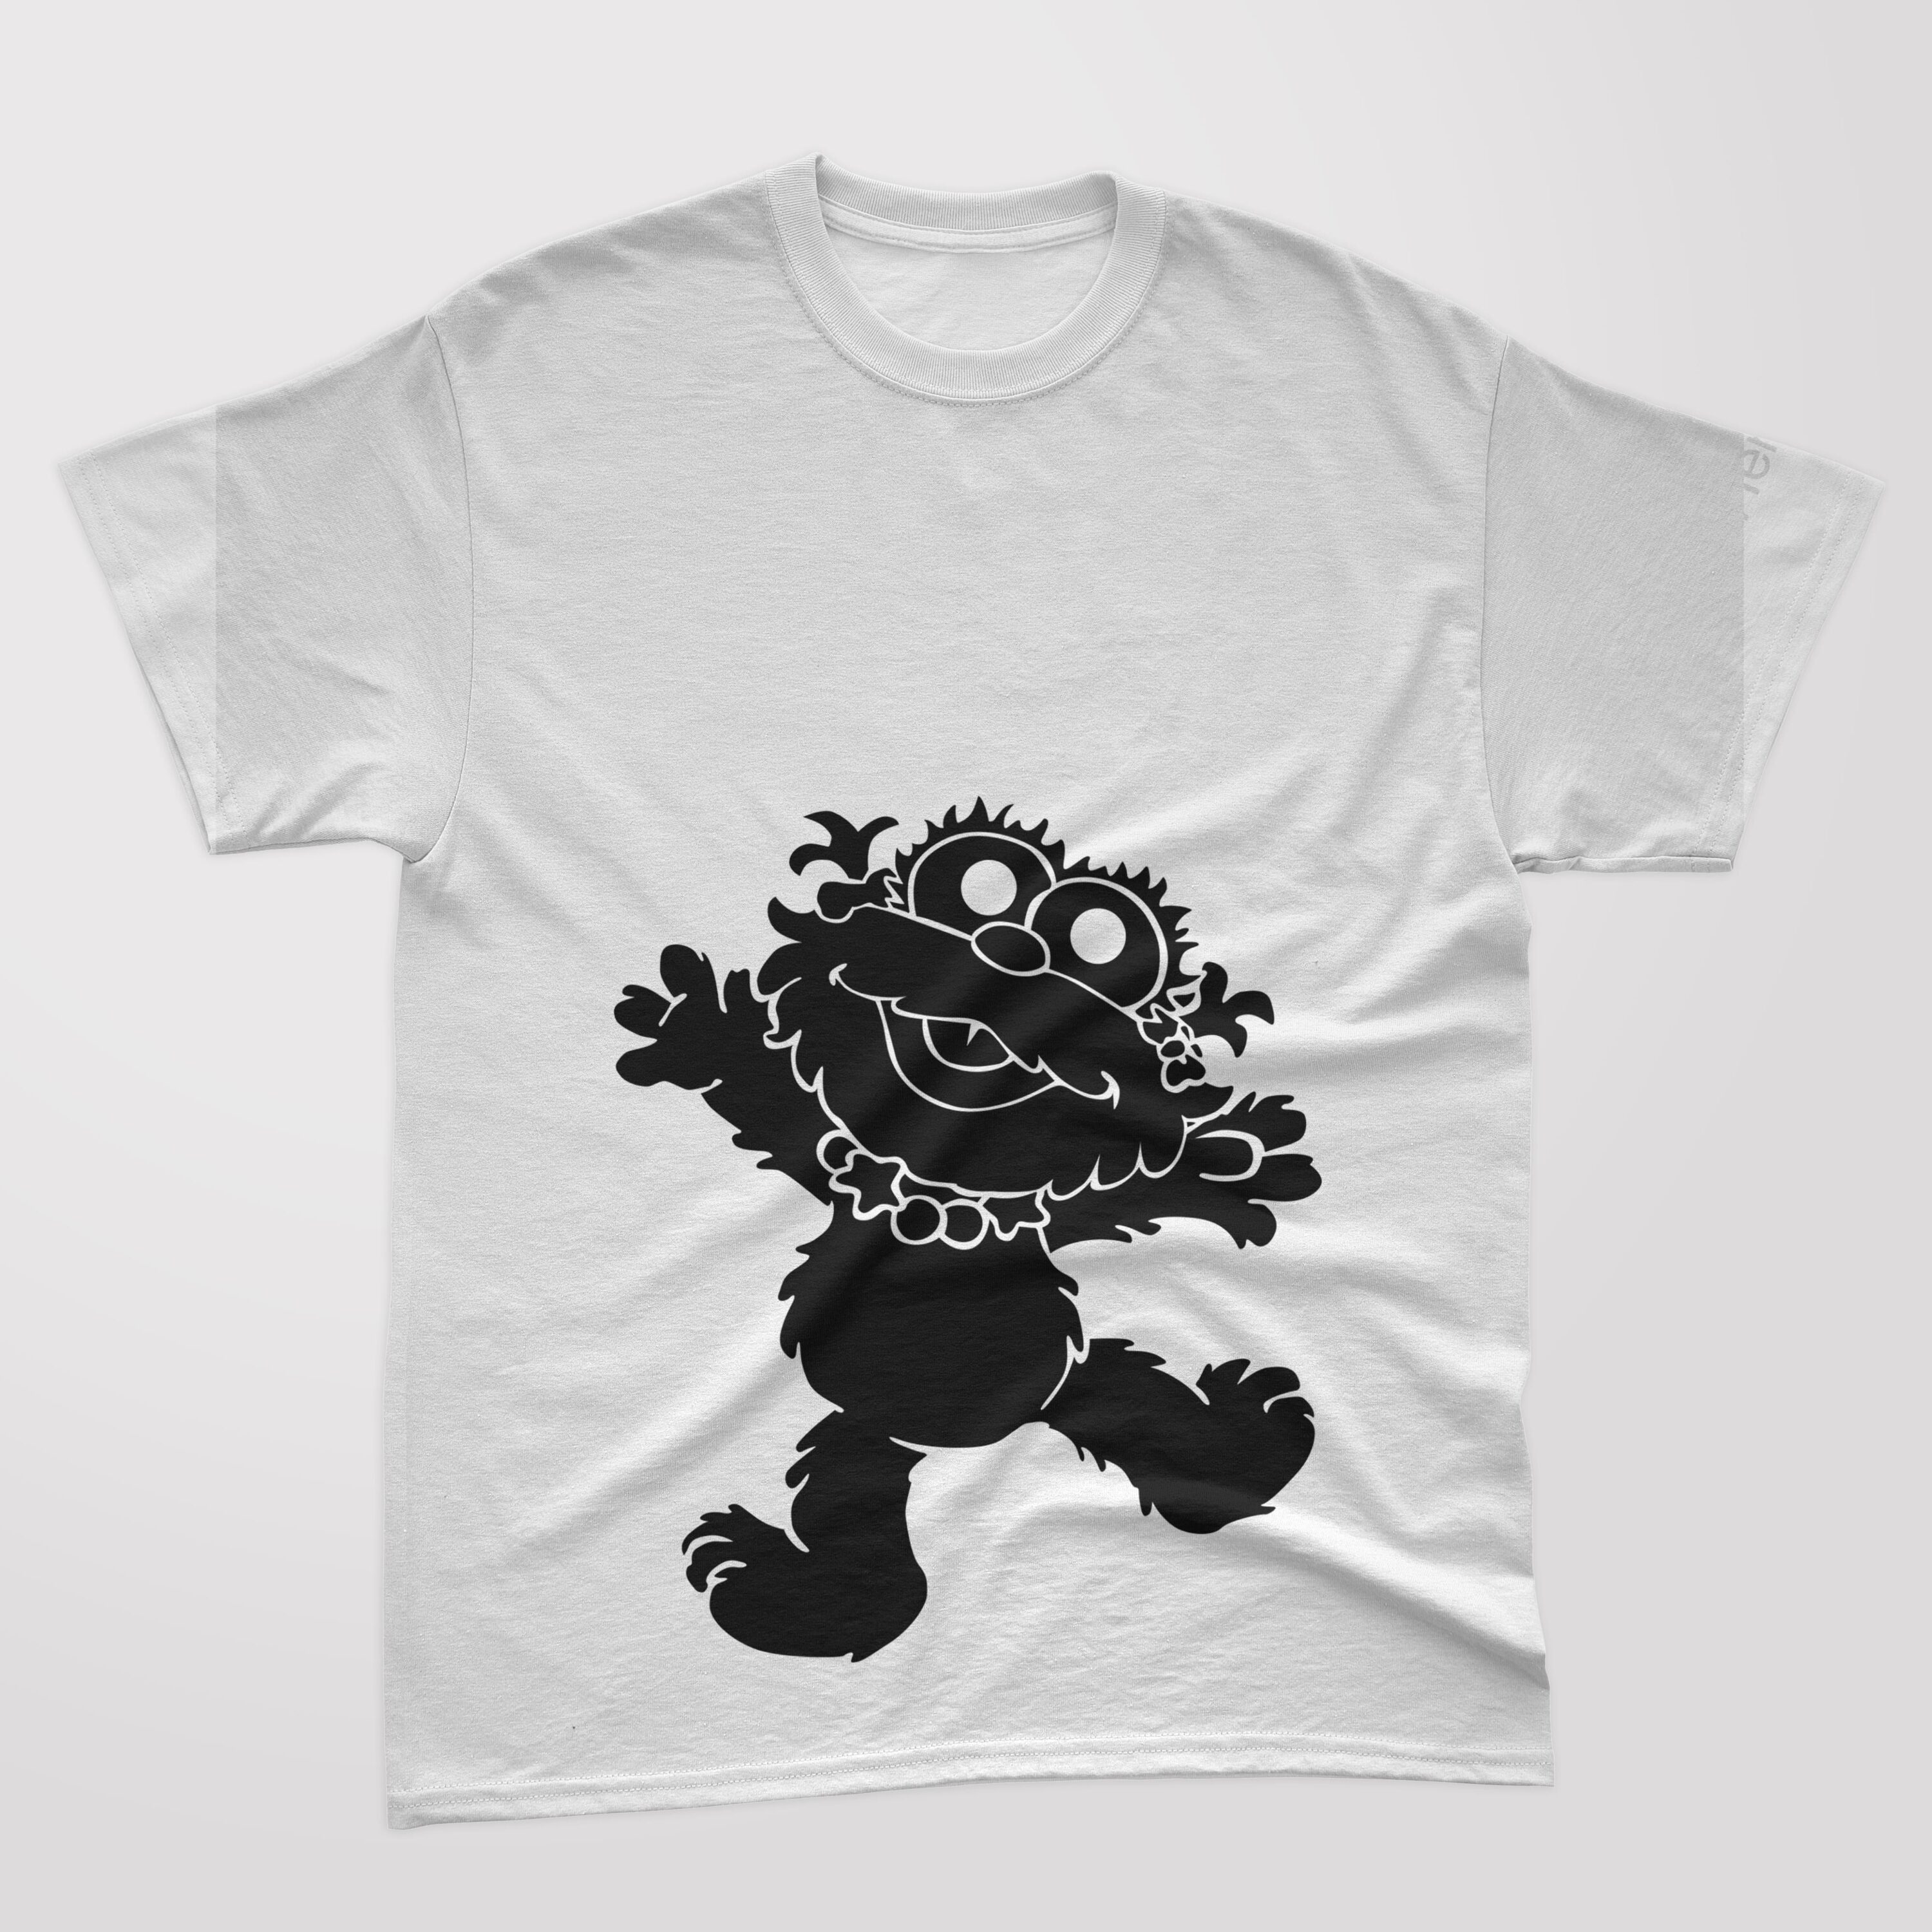 A white t-shirt with a black silhouette funny baby cookie monster.